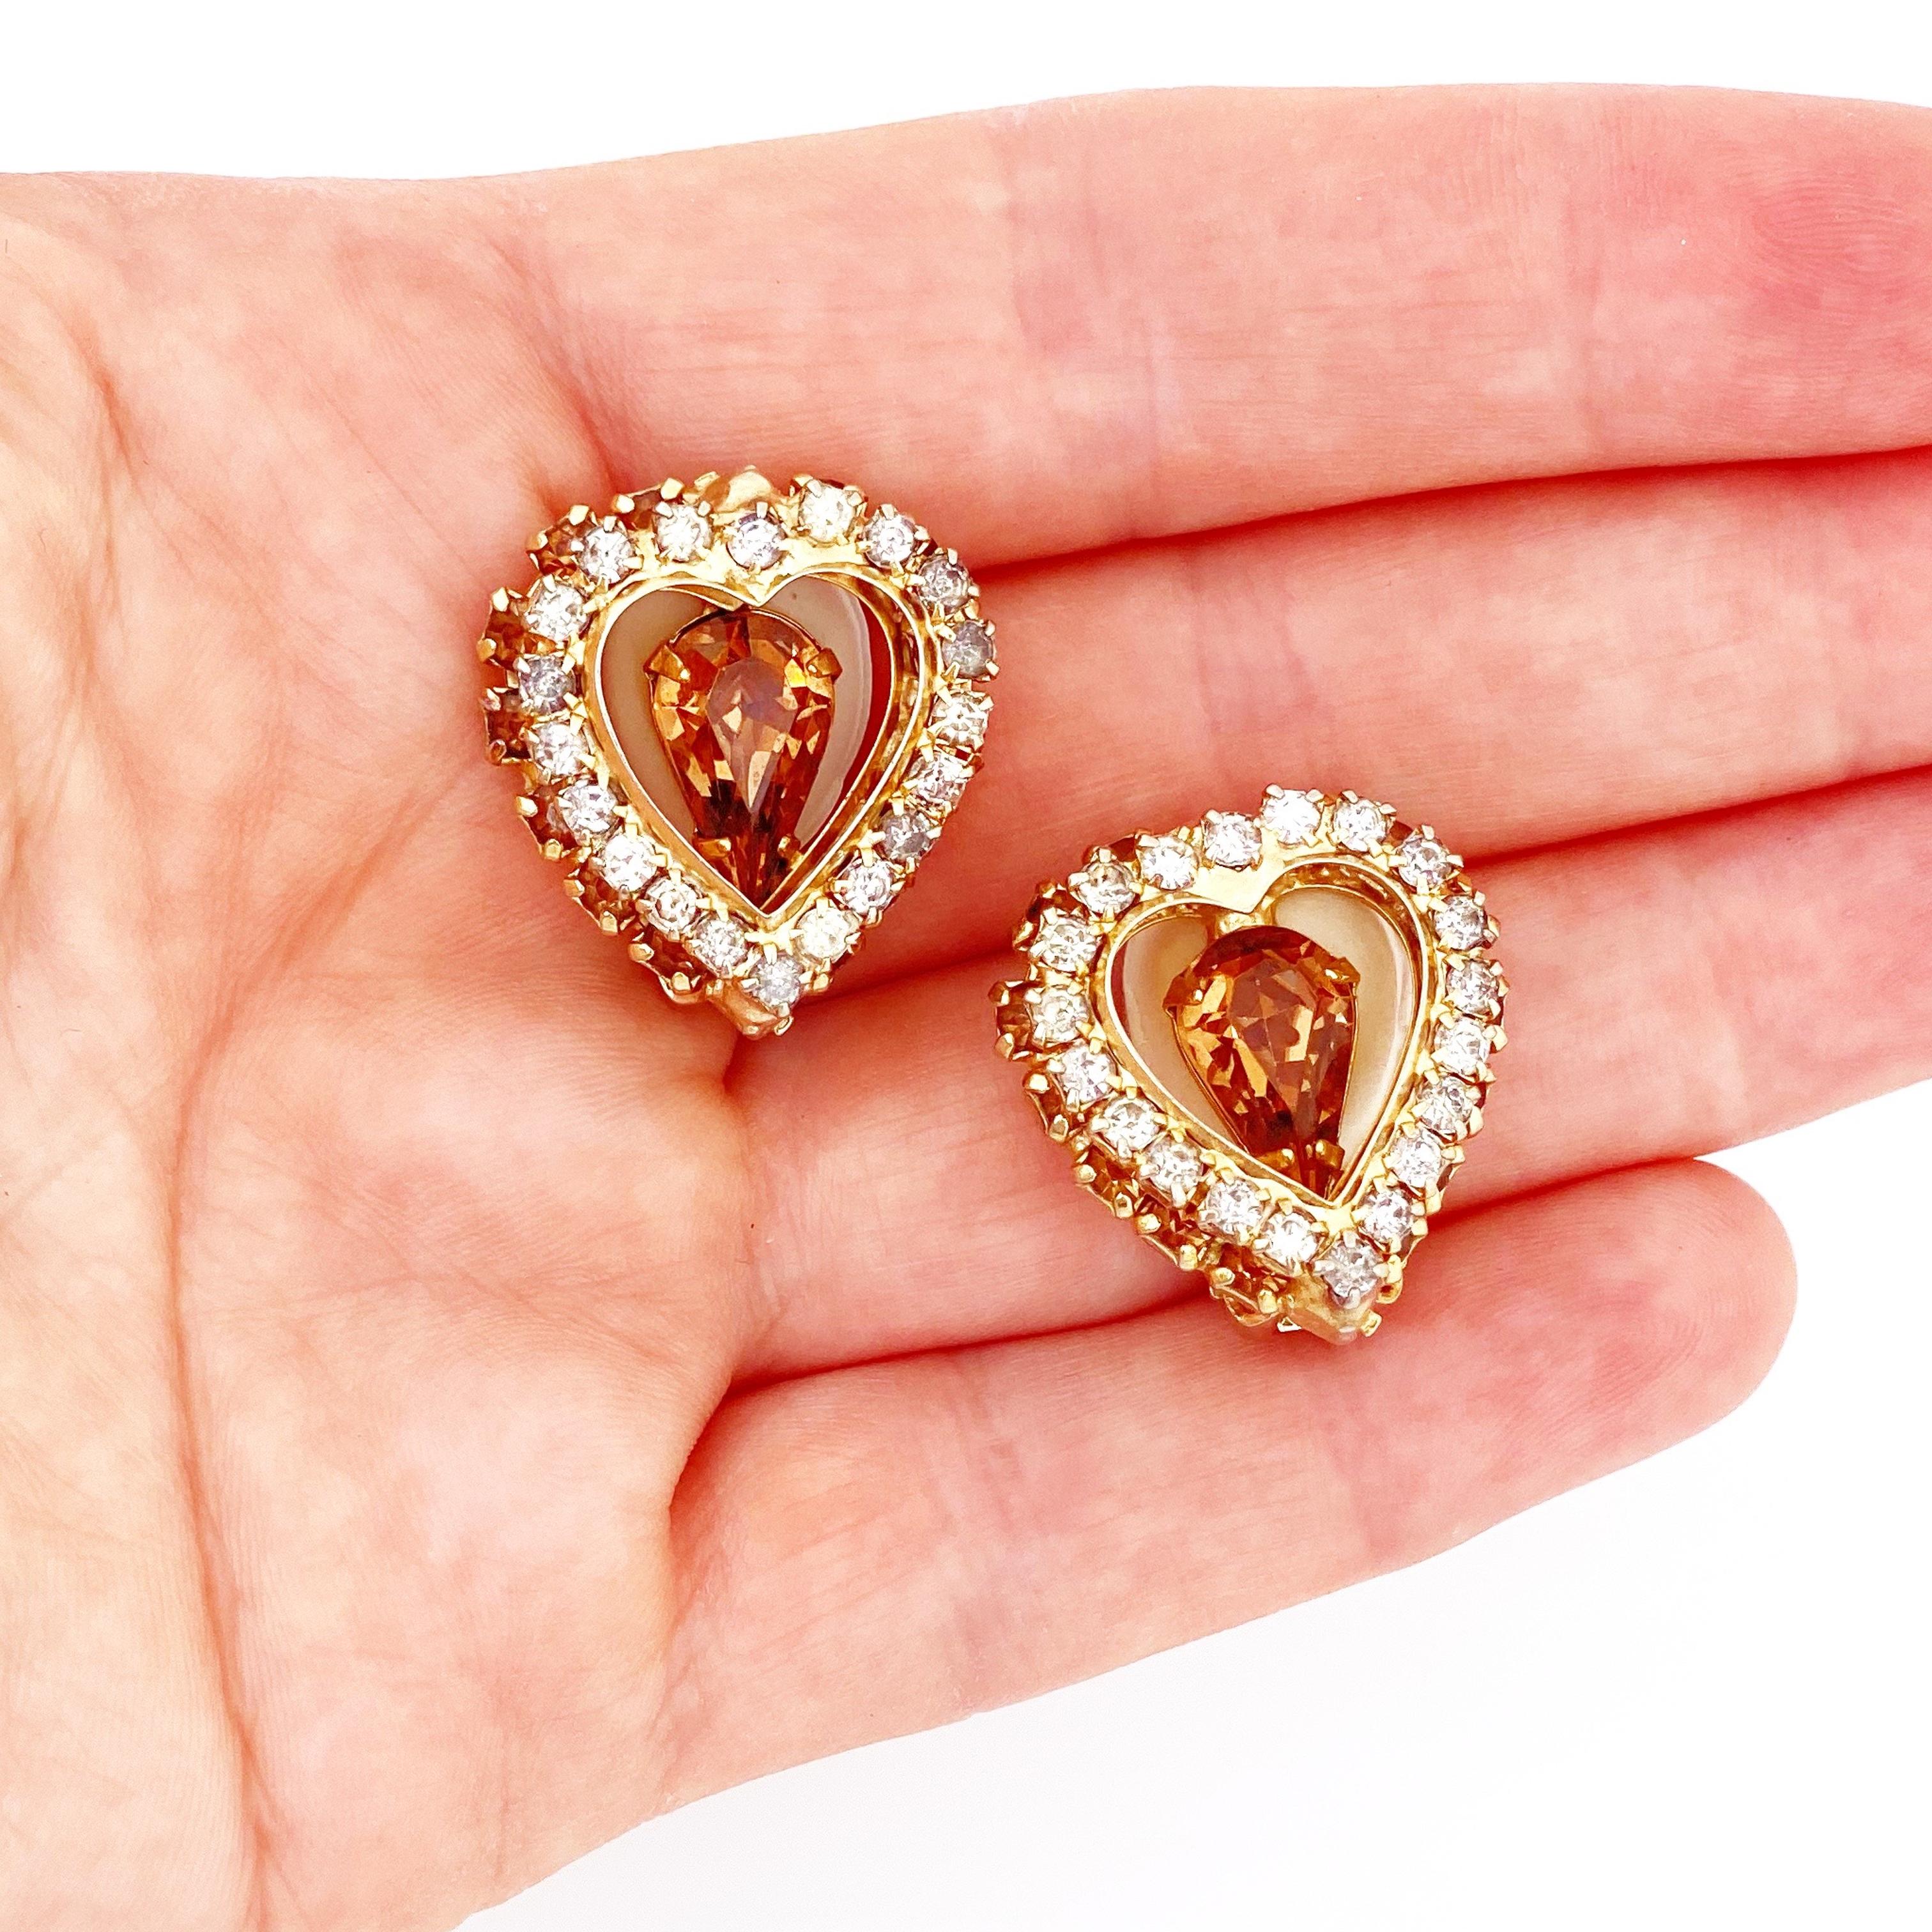 Women's Rhinestone Heart Earrings With Smoked Topaz Crystals By Joseph Warner, 1960s For Sale